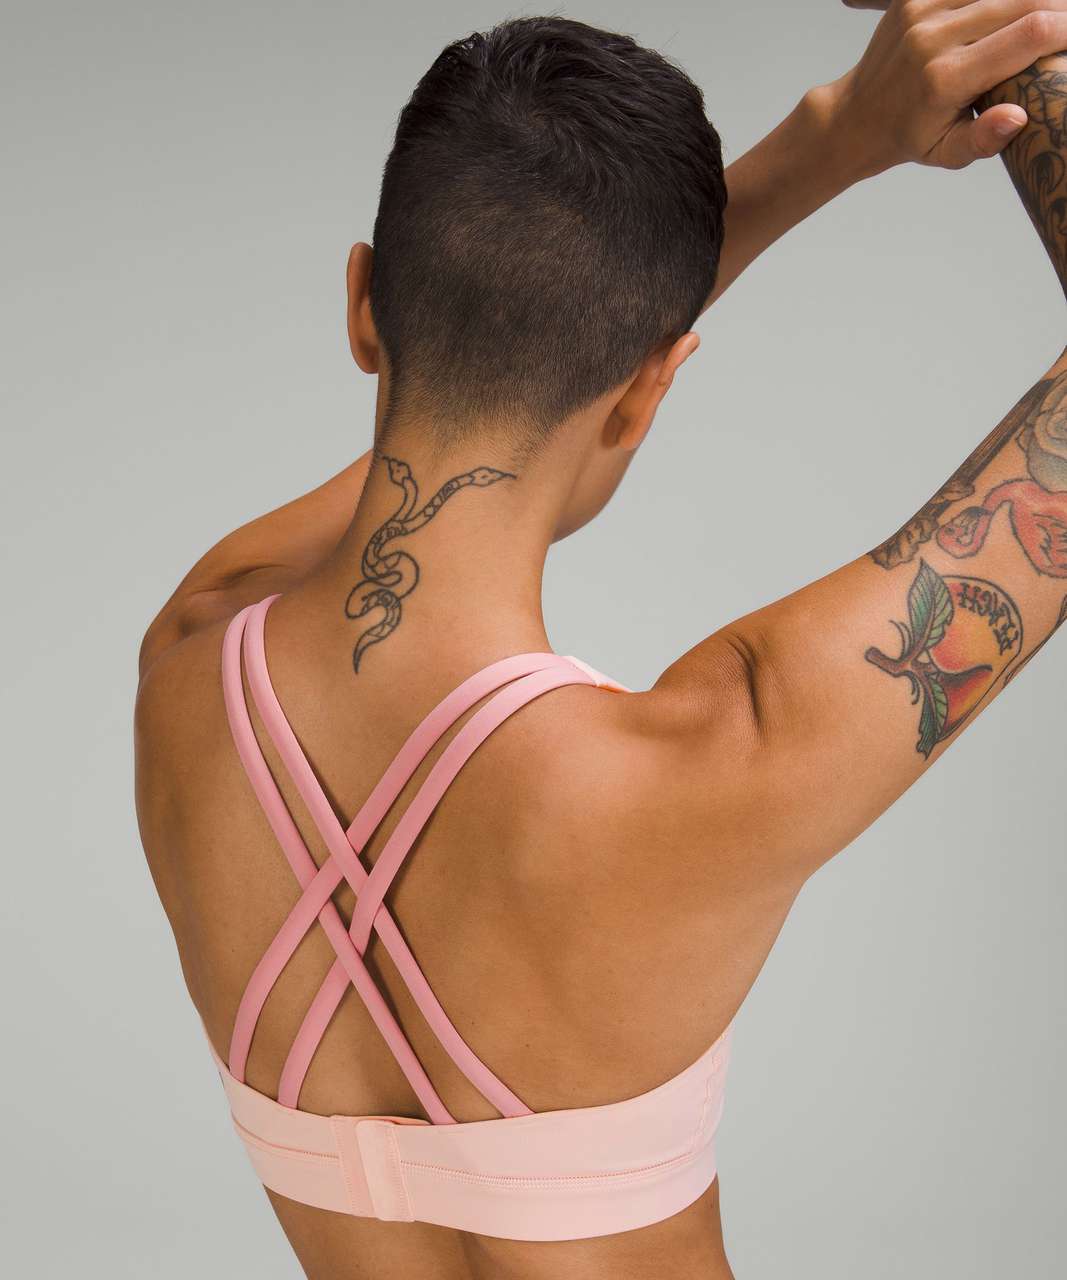 Lululemon Energy Bra Pink Size 8 - $30 (50% Off Retail) - From caitlin